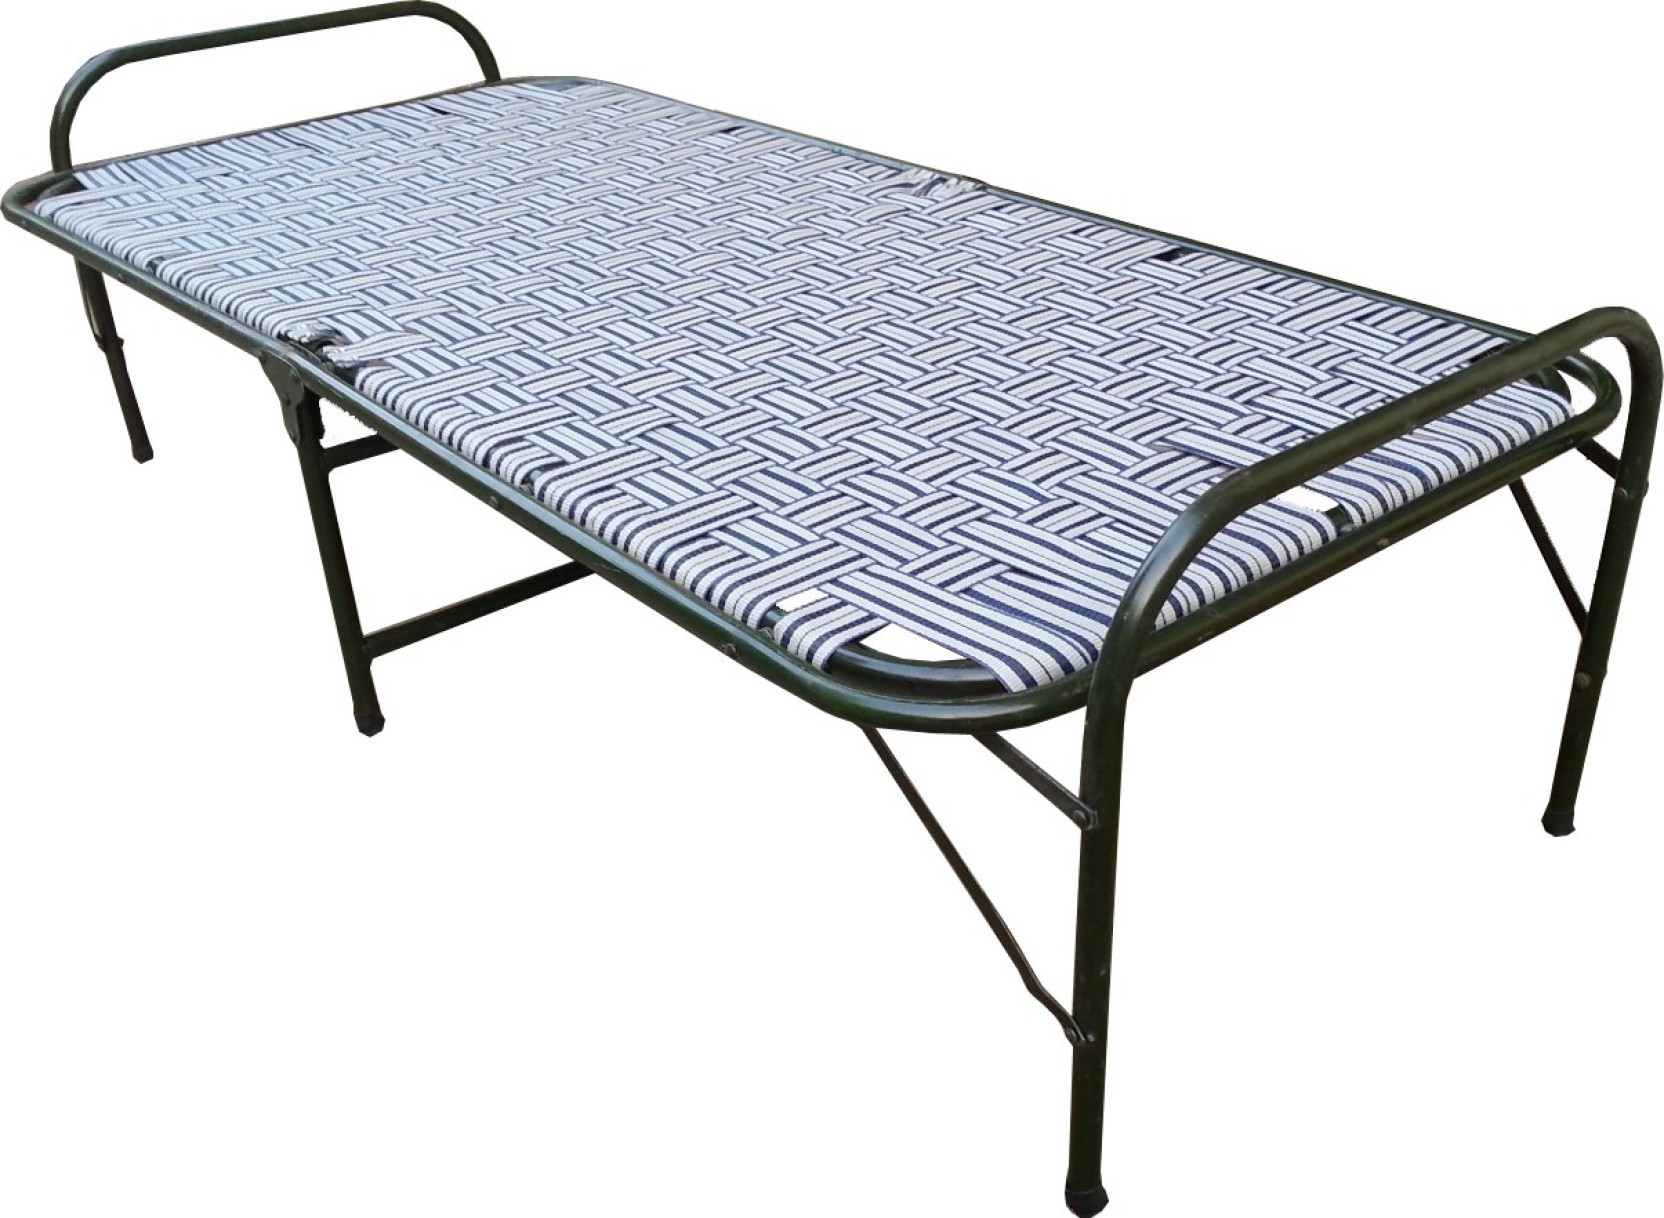 single bed mattress price in india